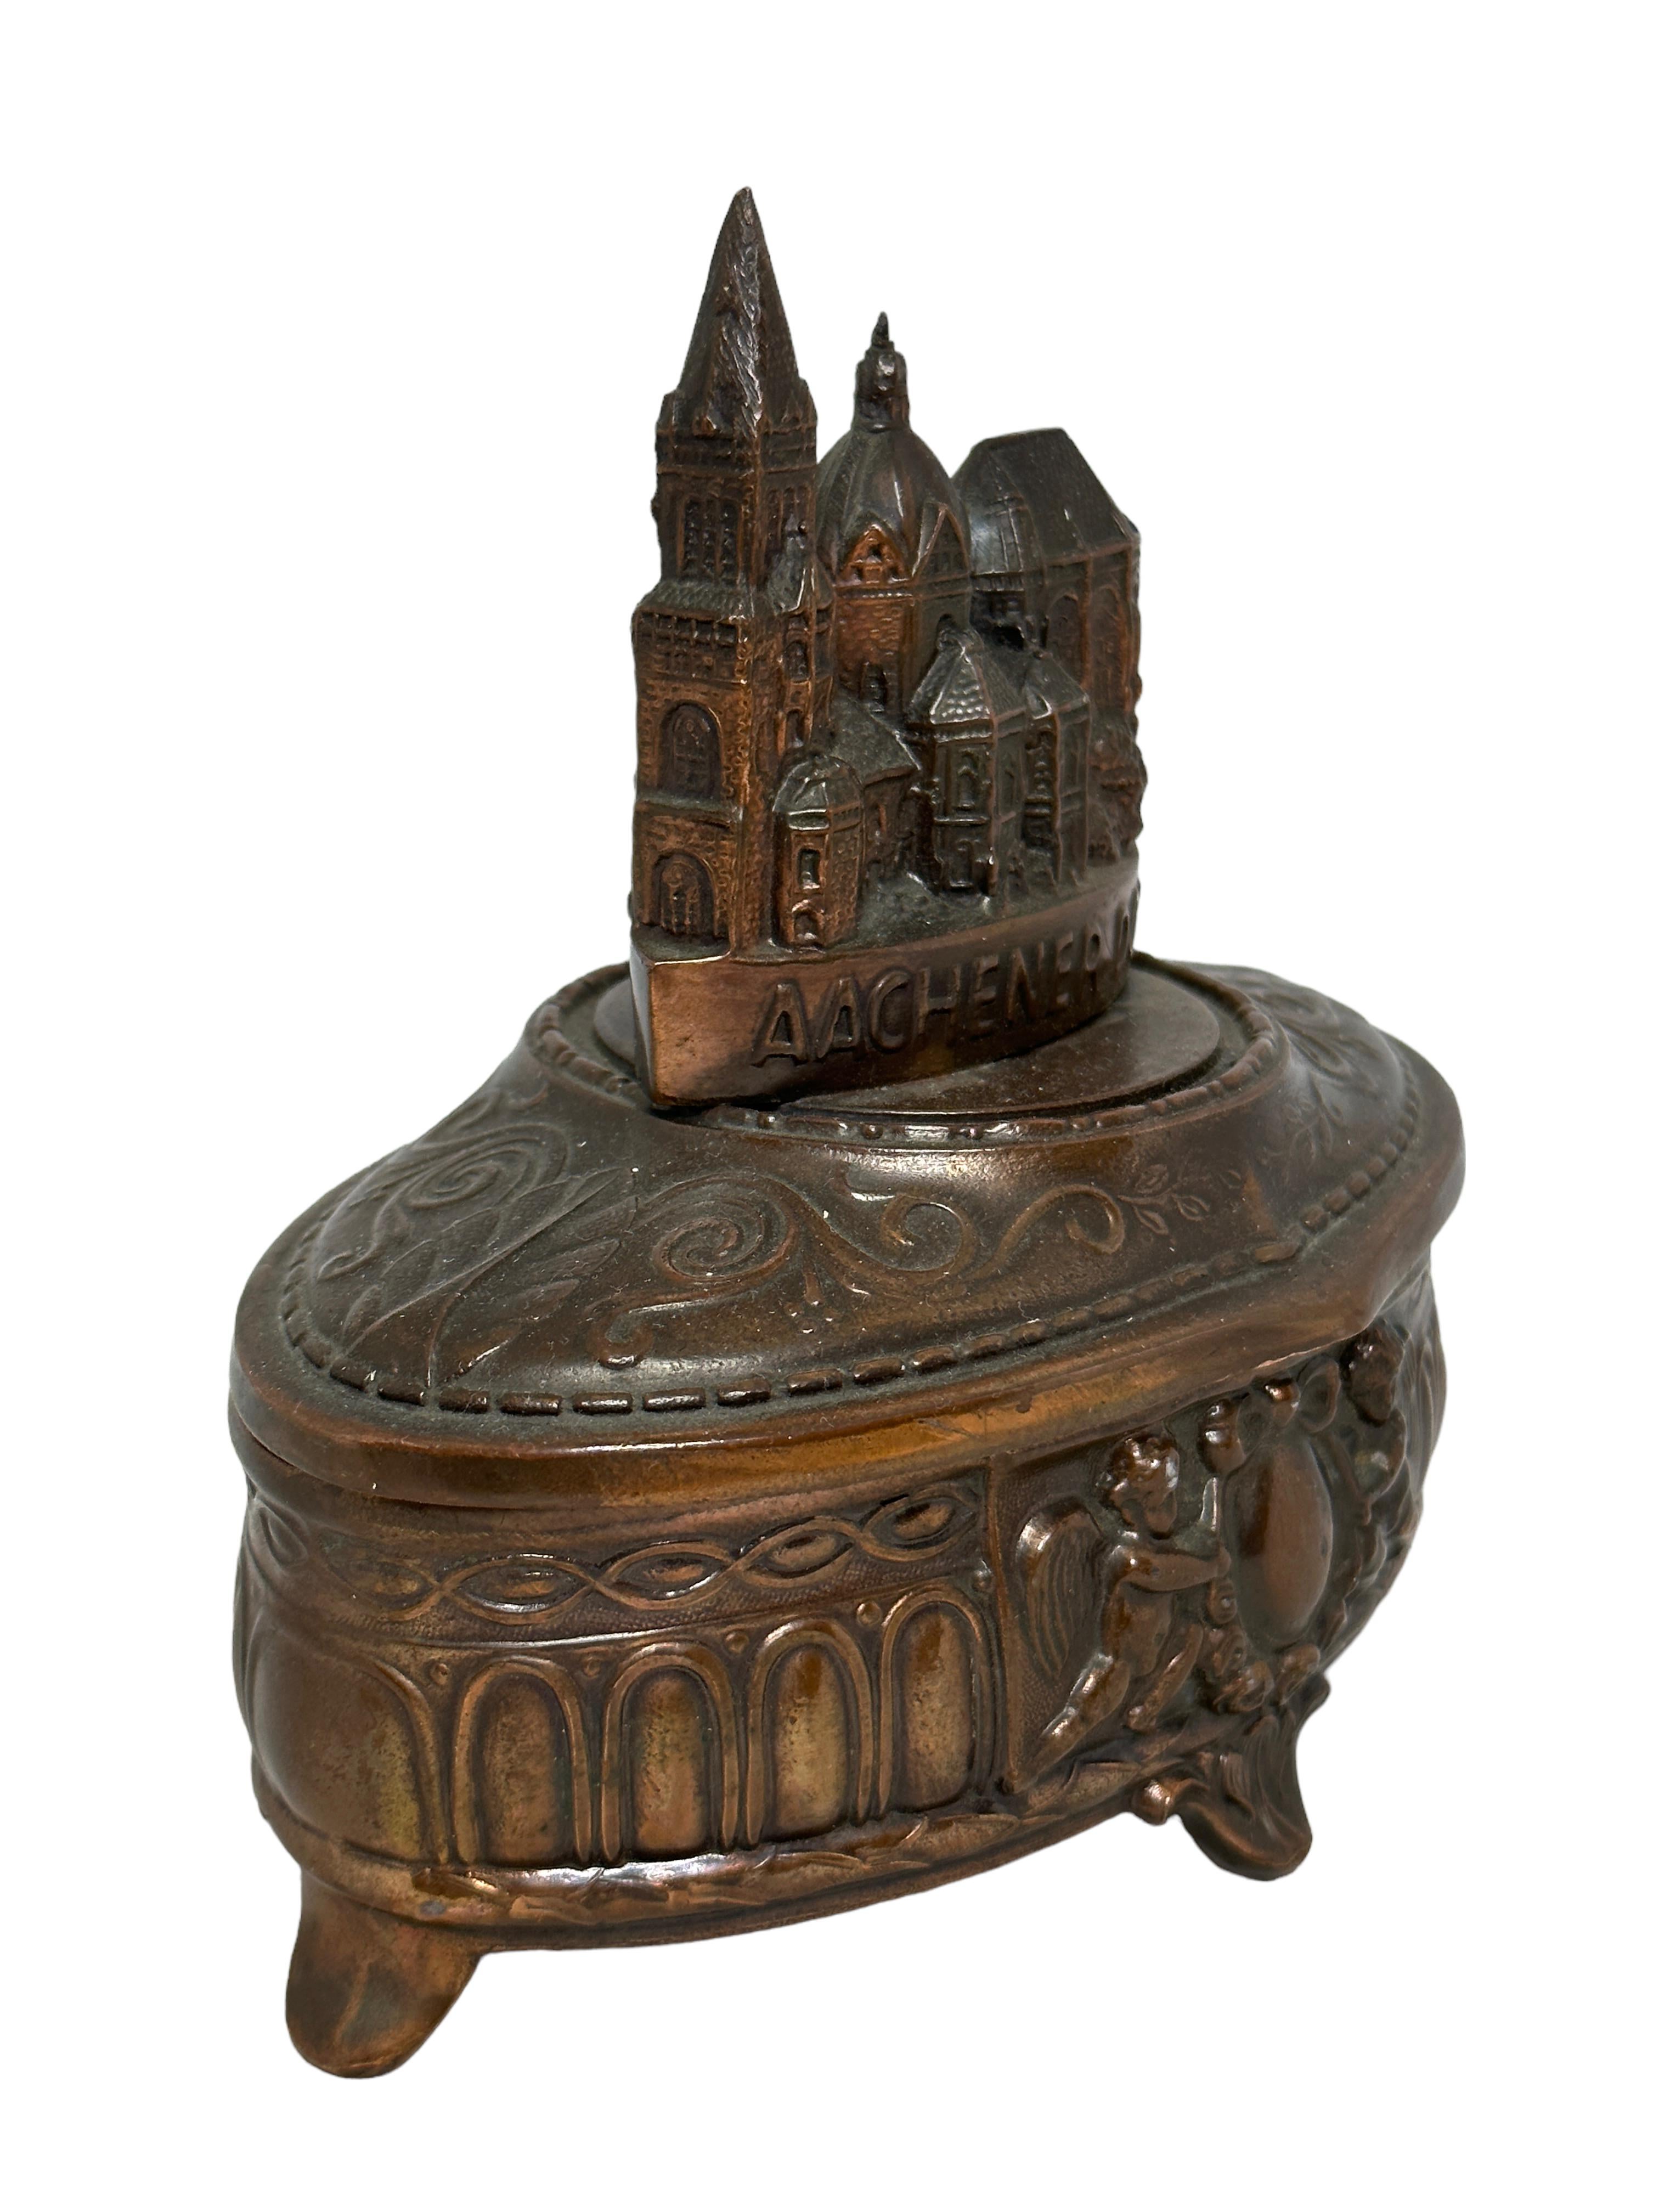 Beautiful souvenir trinket box made of metal. A beautiful nice addition to your vanity room or your collection of Grand Tour items.